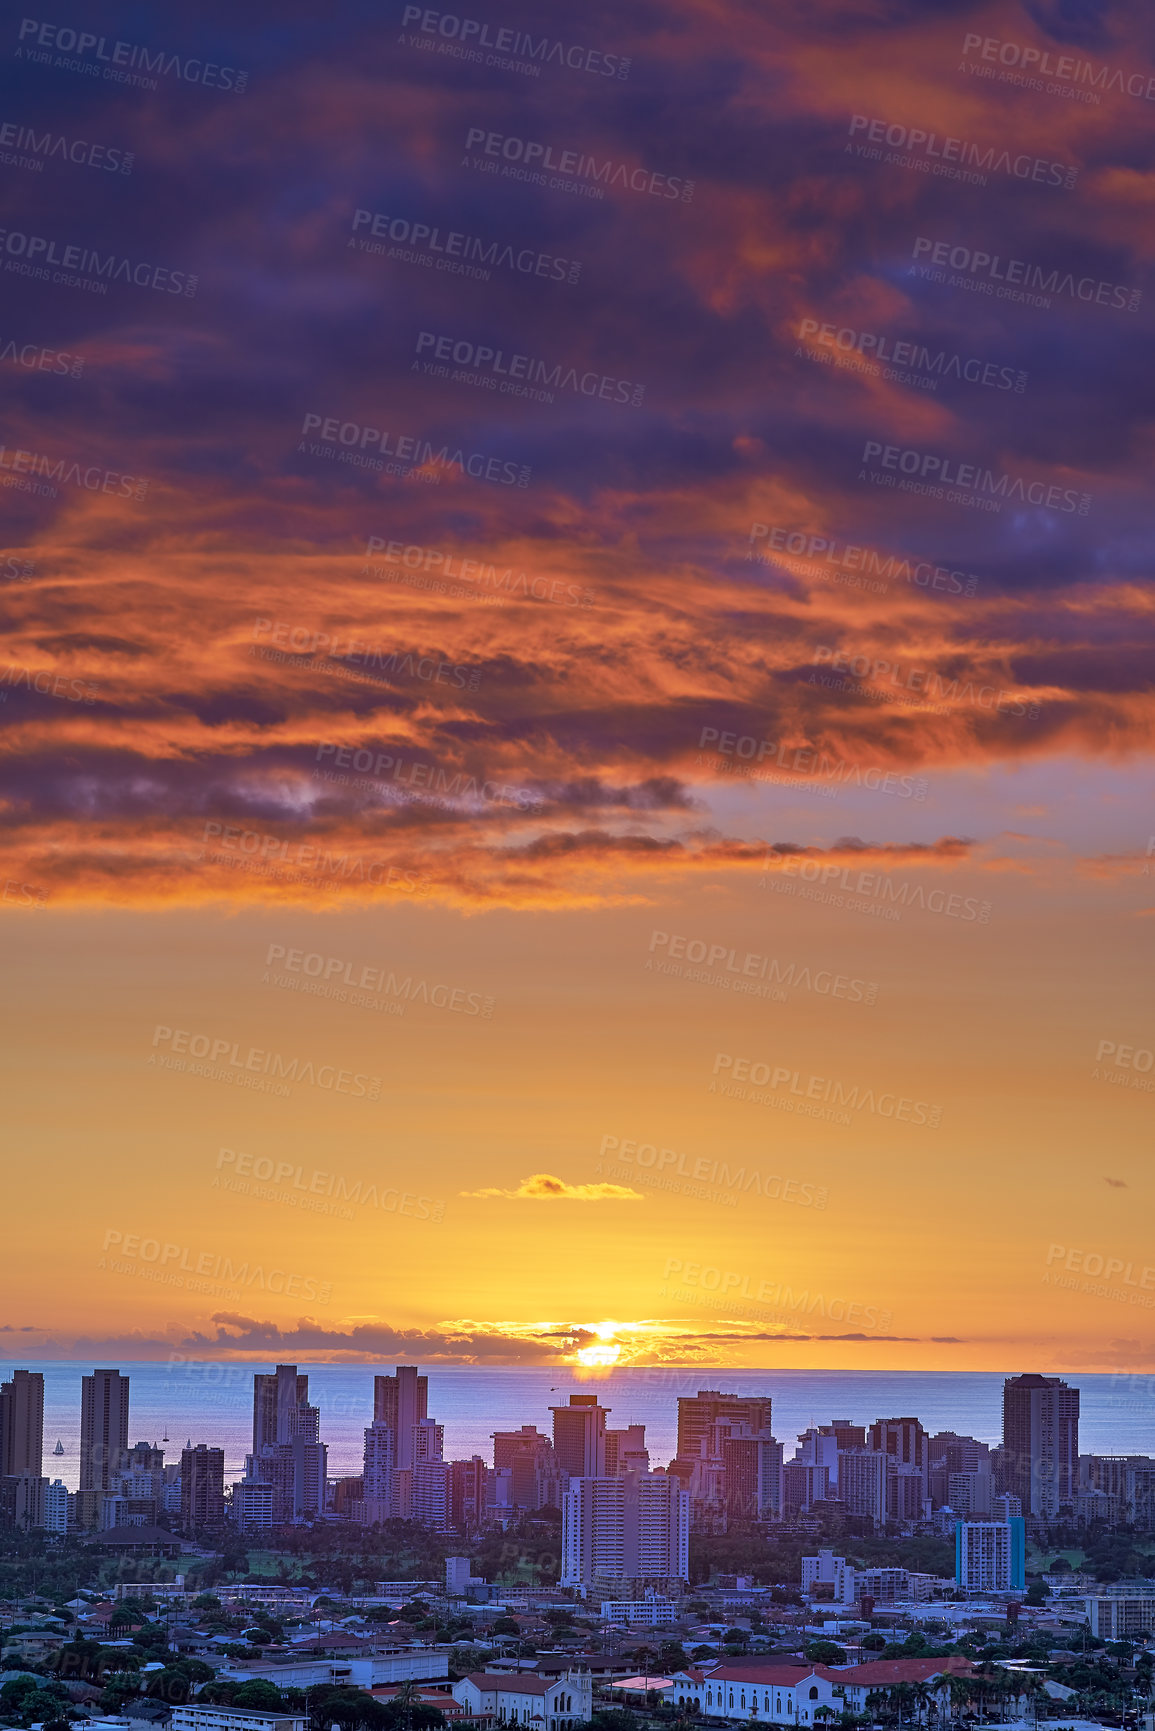 Buy stock photo A sunset over a city skyline near the sea with cloudy purple and orange sky. Sunrise over a blue horizon near urban landscape with copy space. Peaceful holiday destination at night in Waikiki, Hawaii